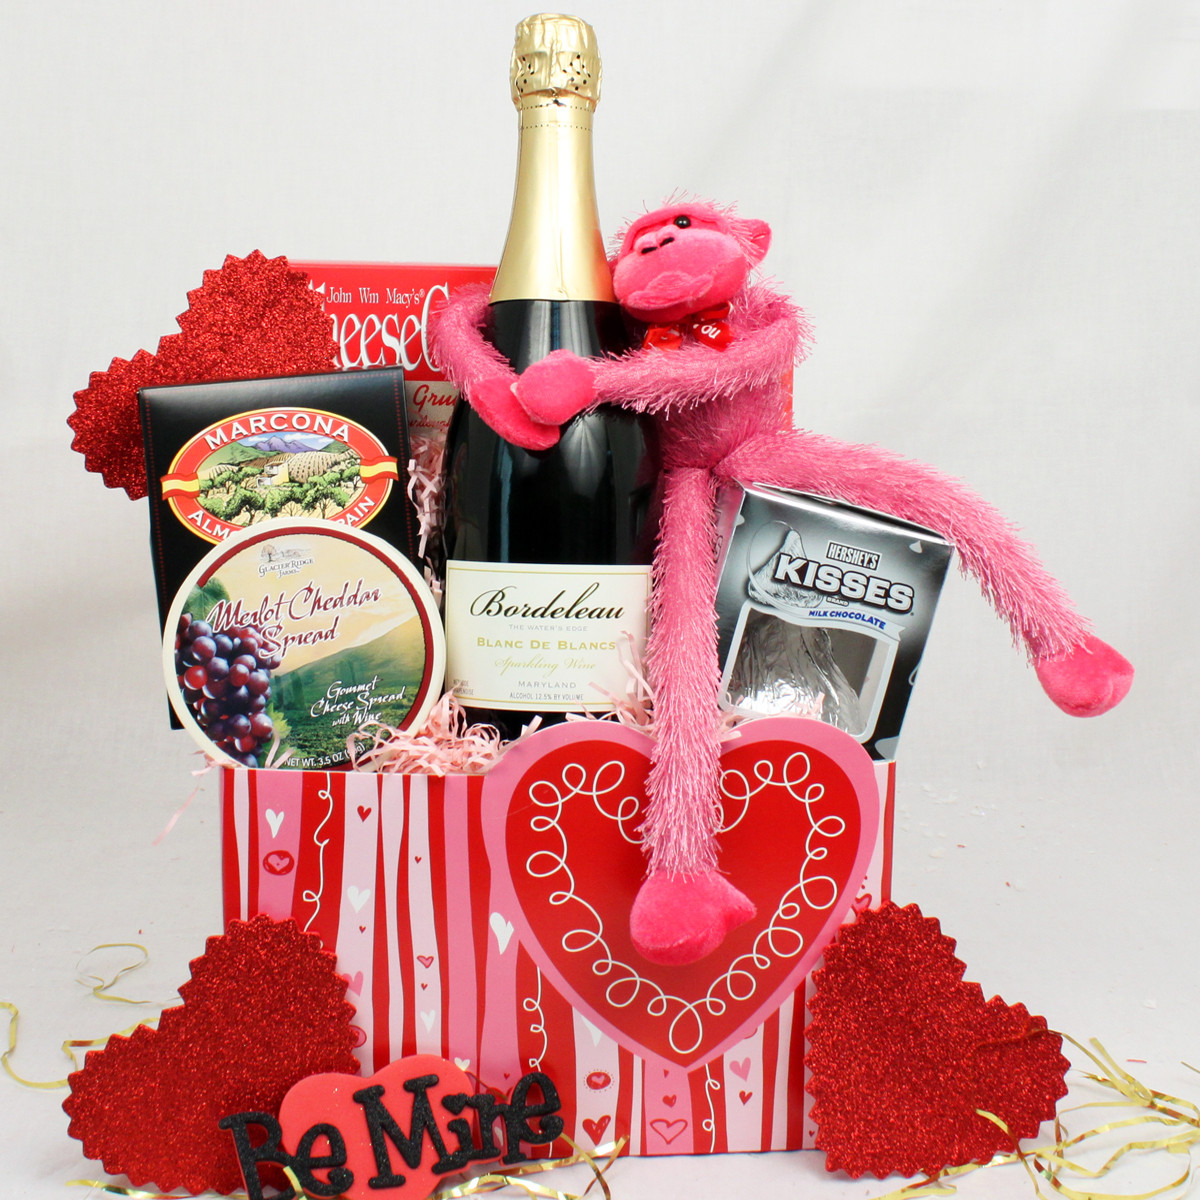 Personal Valentines Gift Ideas
 Creative and Thoughtful Valentine’s Day Gifts for Her